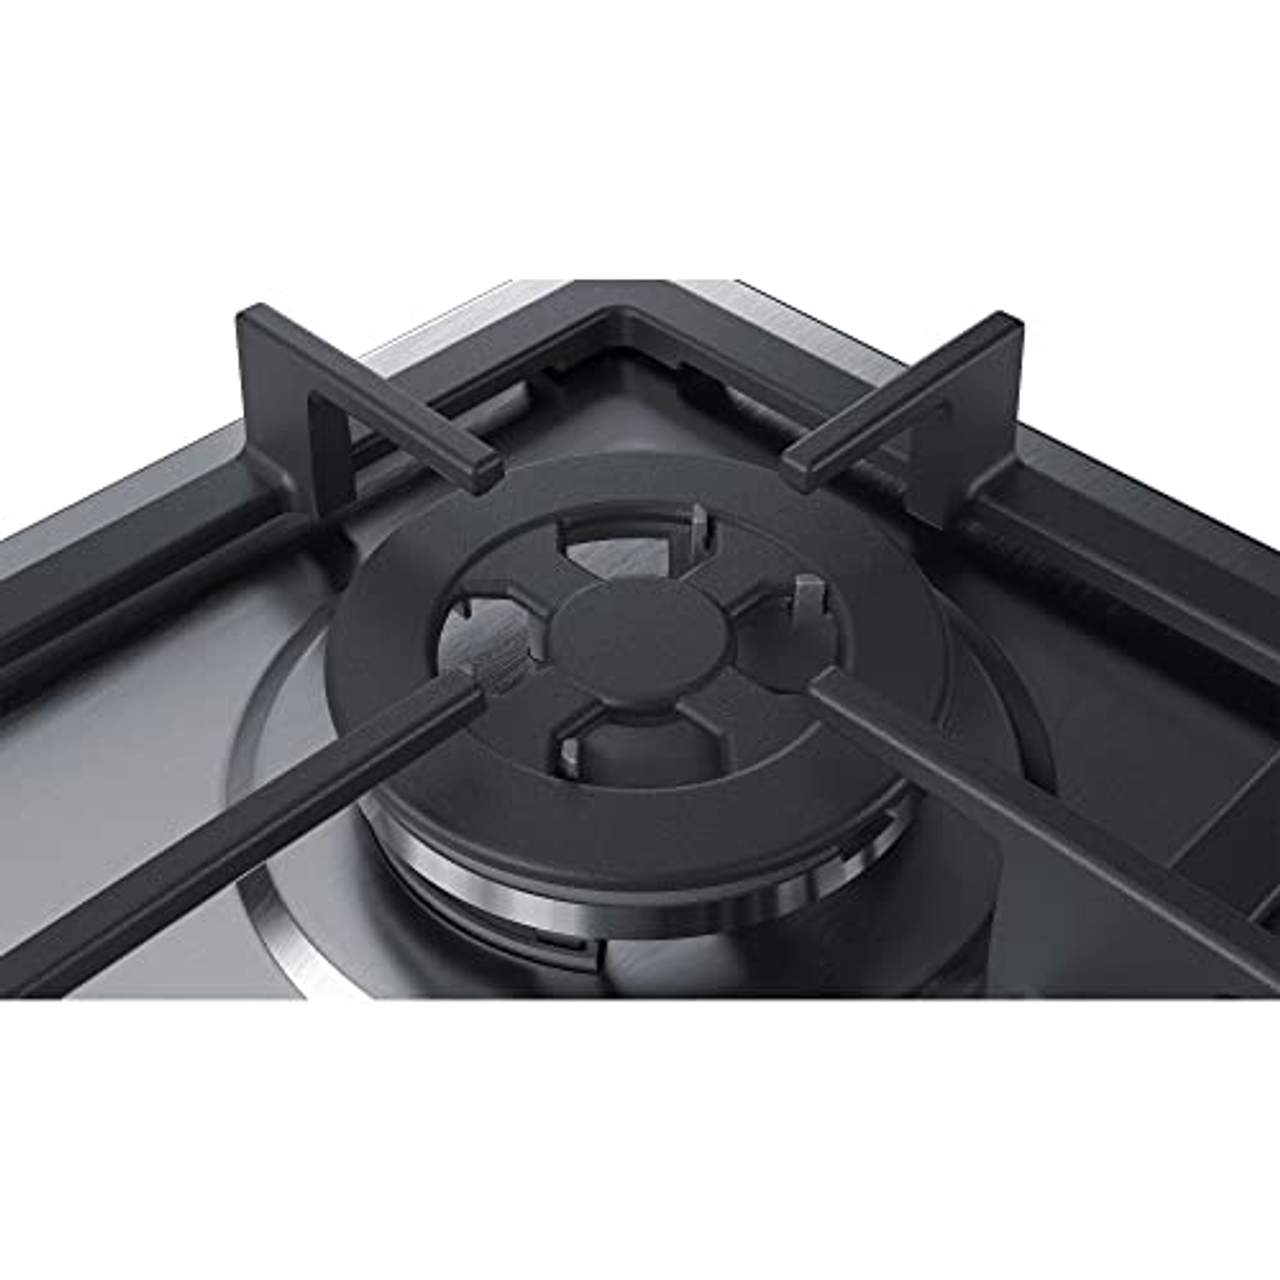 Bosch Serie 4 PGH6B5B90 hob Stainless steel Built-in Gas 4 zone